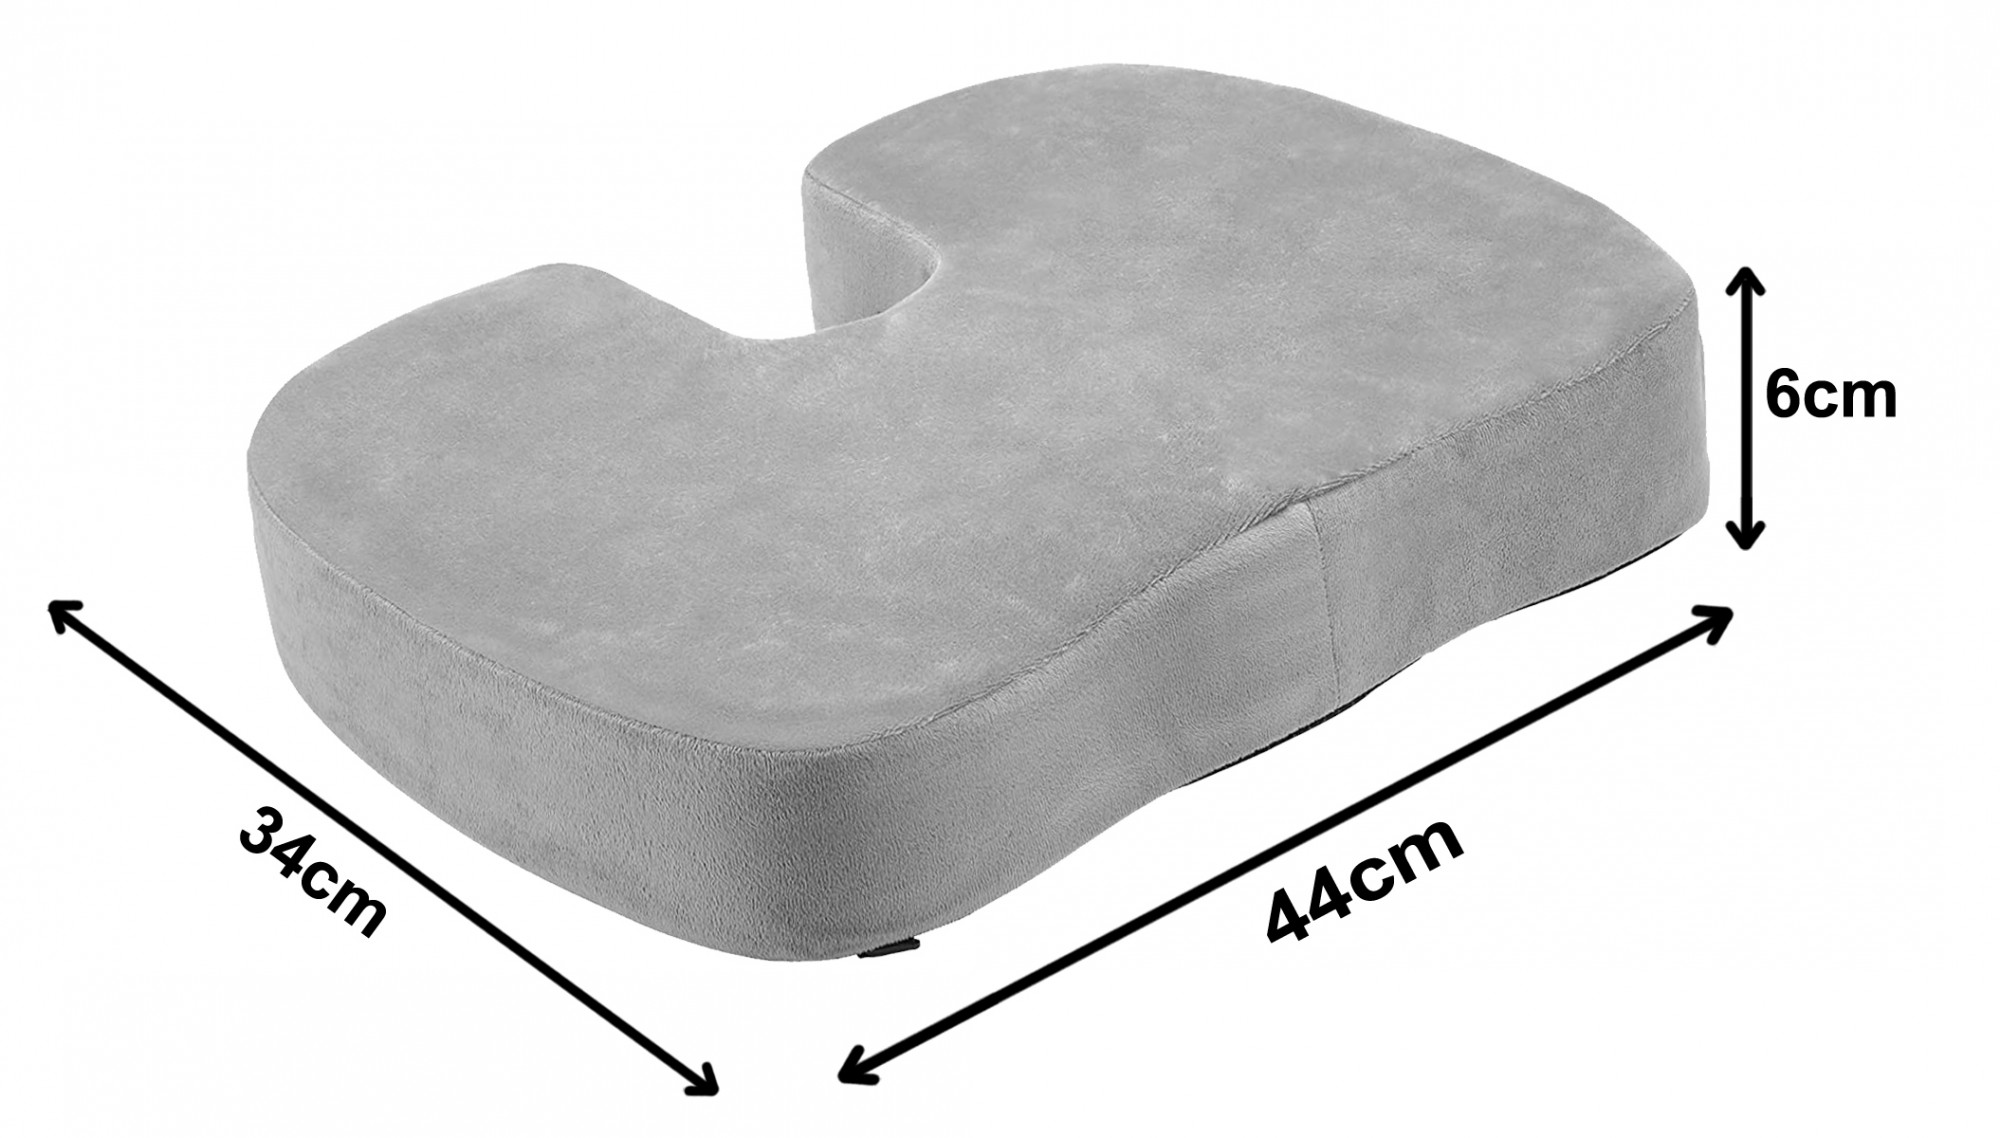 Kuber Industries Seat Cushion Memory Foam Coccyx Cushion Designed for Back, Hip, and Tailbone Pain - for Office Chair,Car Seat, Wheelchair (Grey)